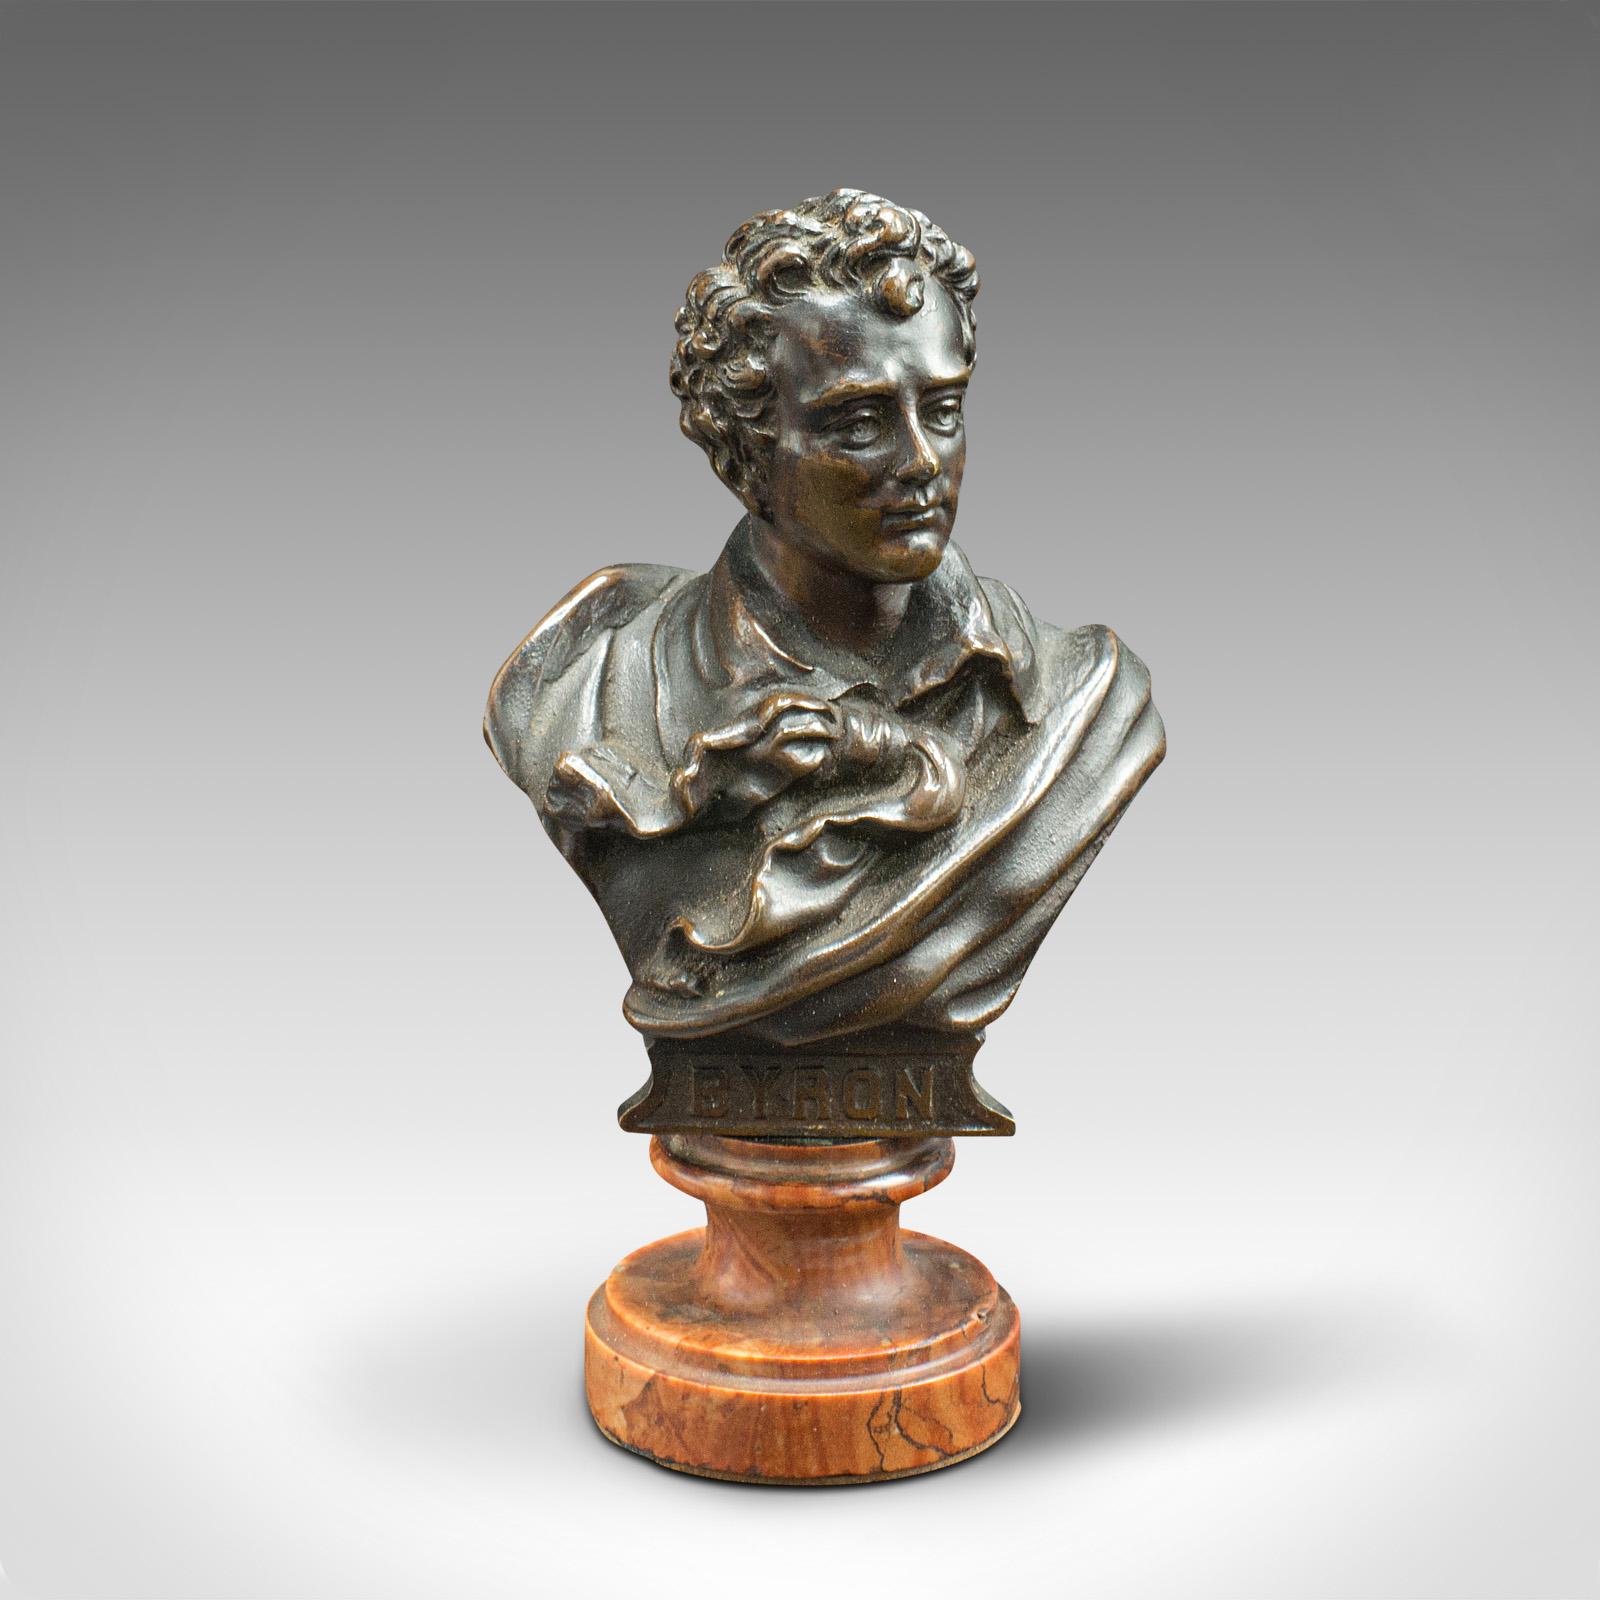 This is a small antique portrait bust. An Austrian, bronze figure of Lord Byron (1788 - 1824) set upon marble, dating to the late Victorian period, circa 1900.

Of petite form, with a characterful detail and light weathering
Displays a desirable